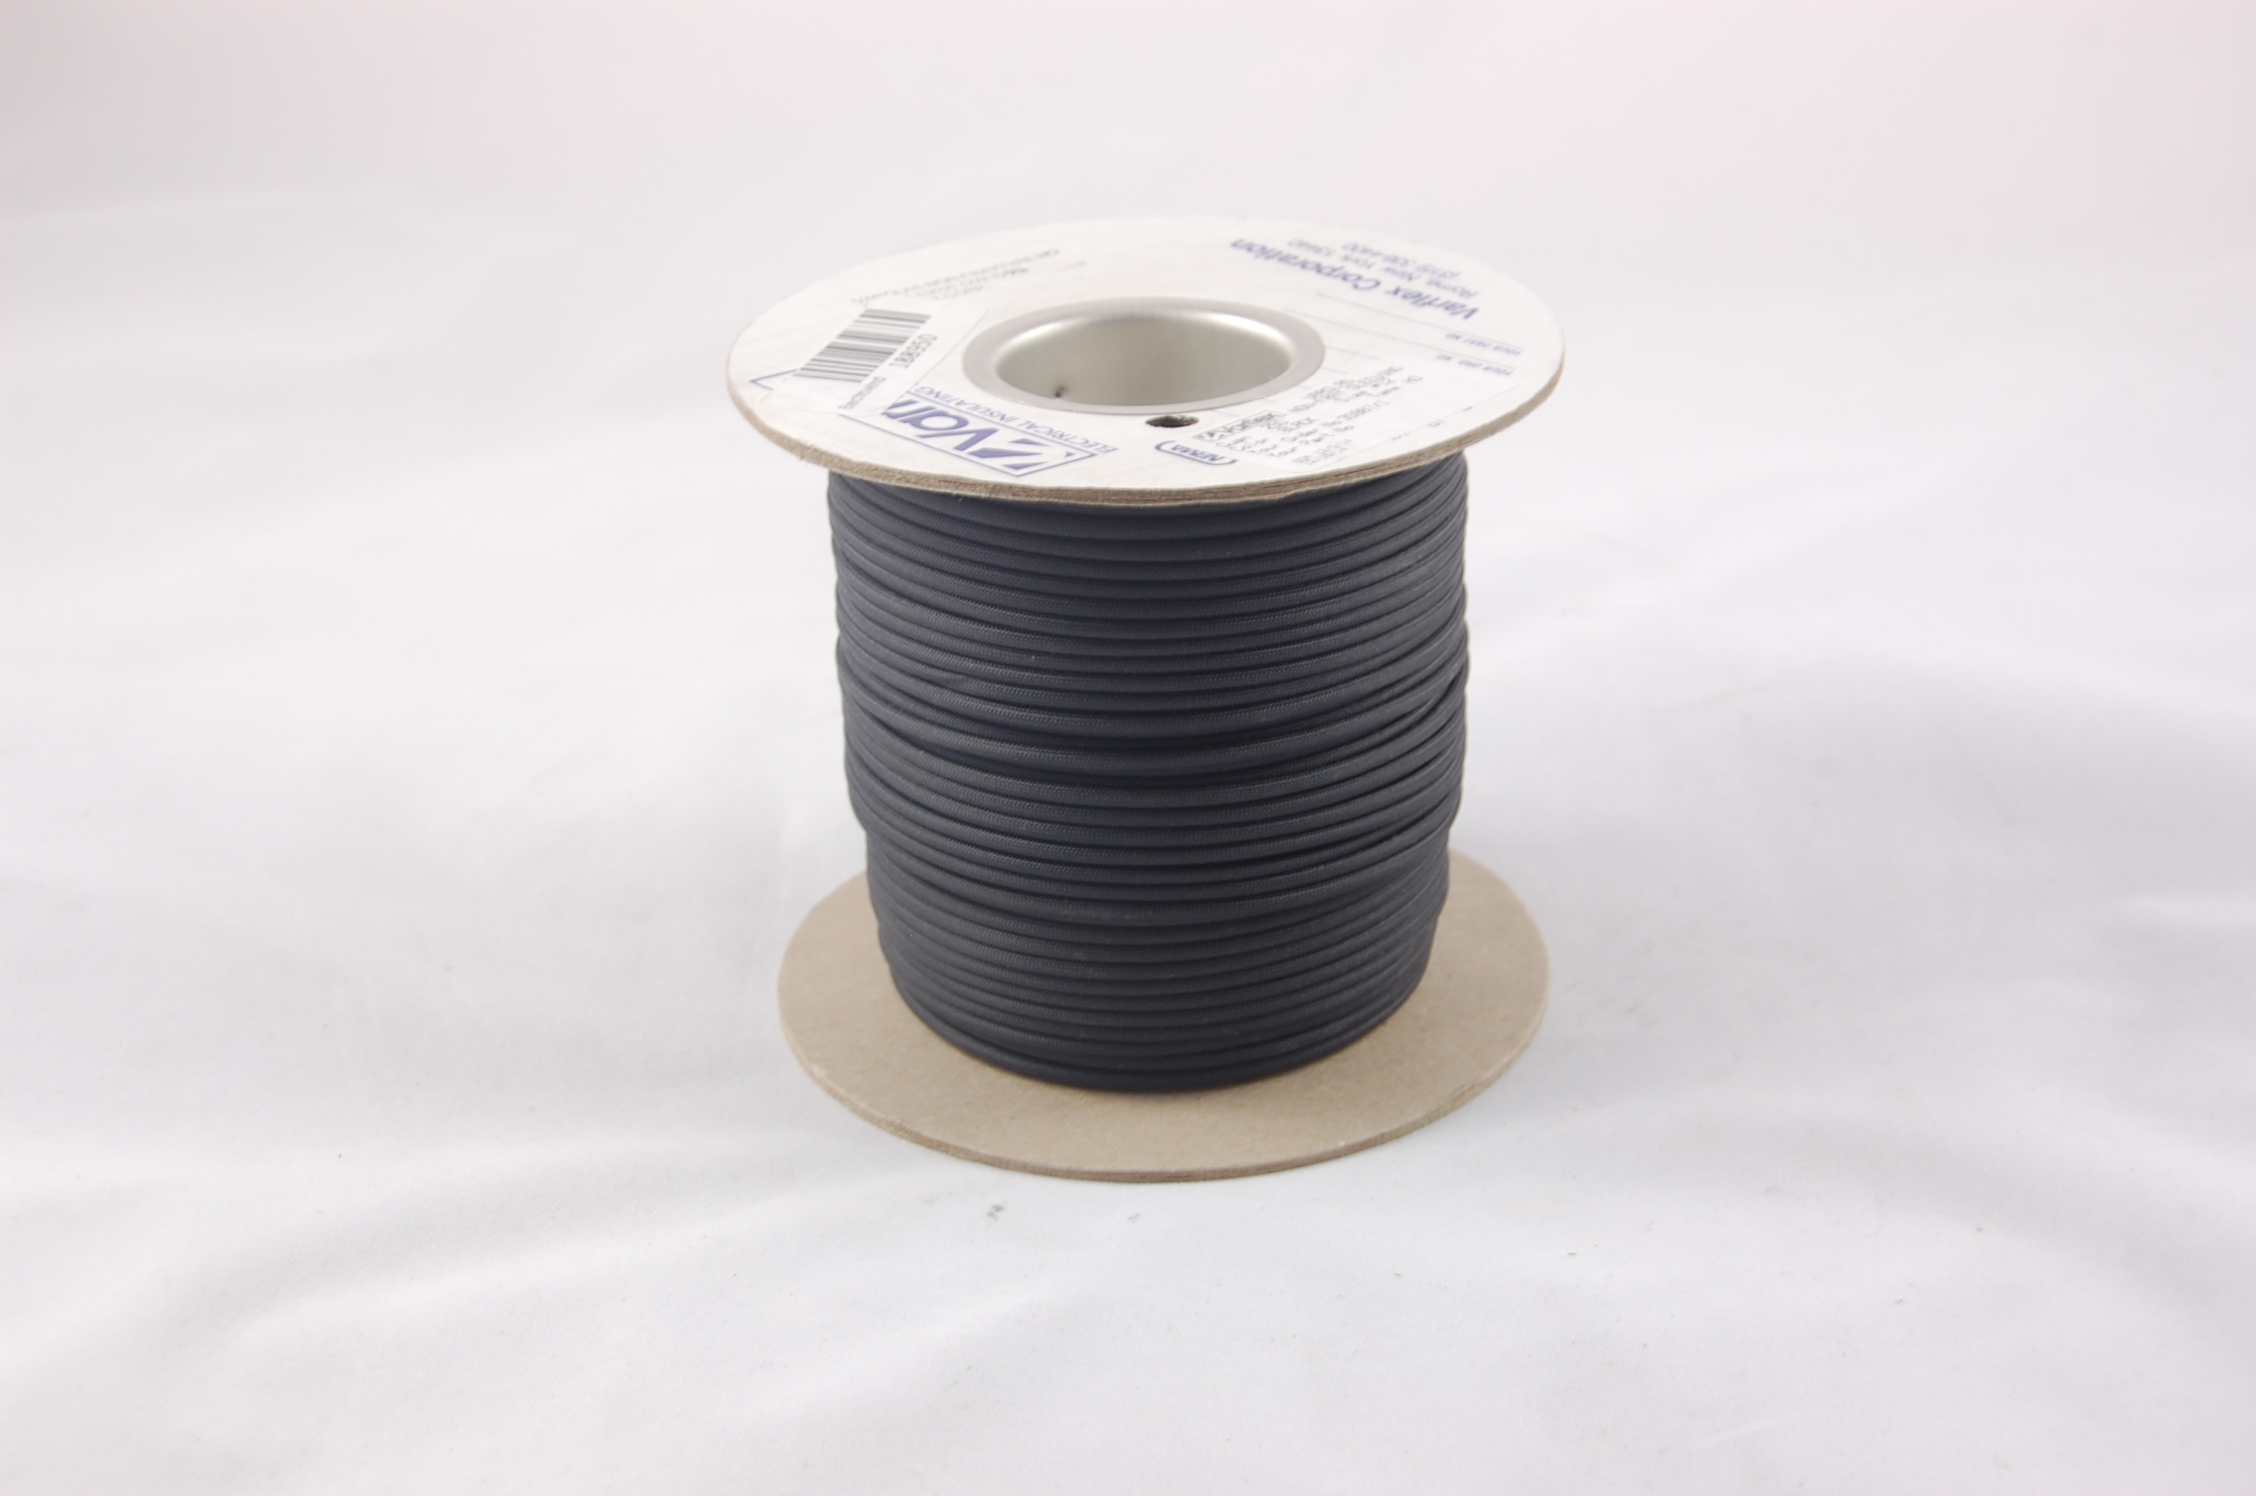 #22 AWG Varglas Type HO Heat-Cleaned and Treated High Temperature Non-Fray Flexible Fiberglass Sleeving , black, 500 FT per spool